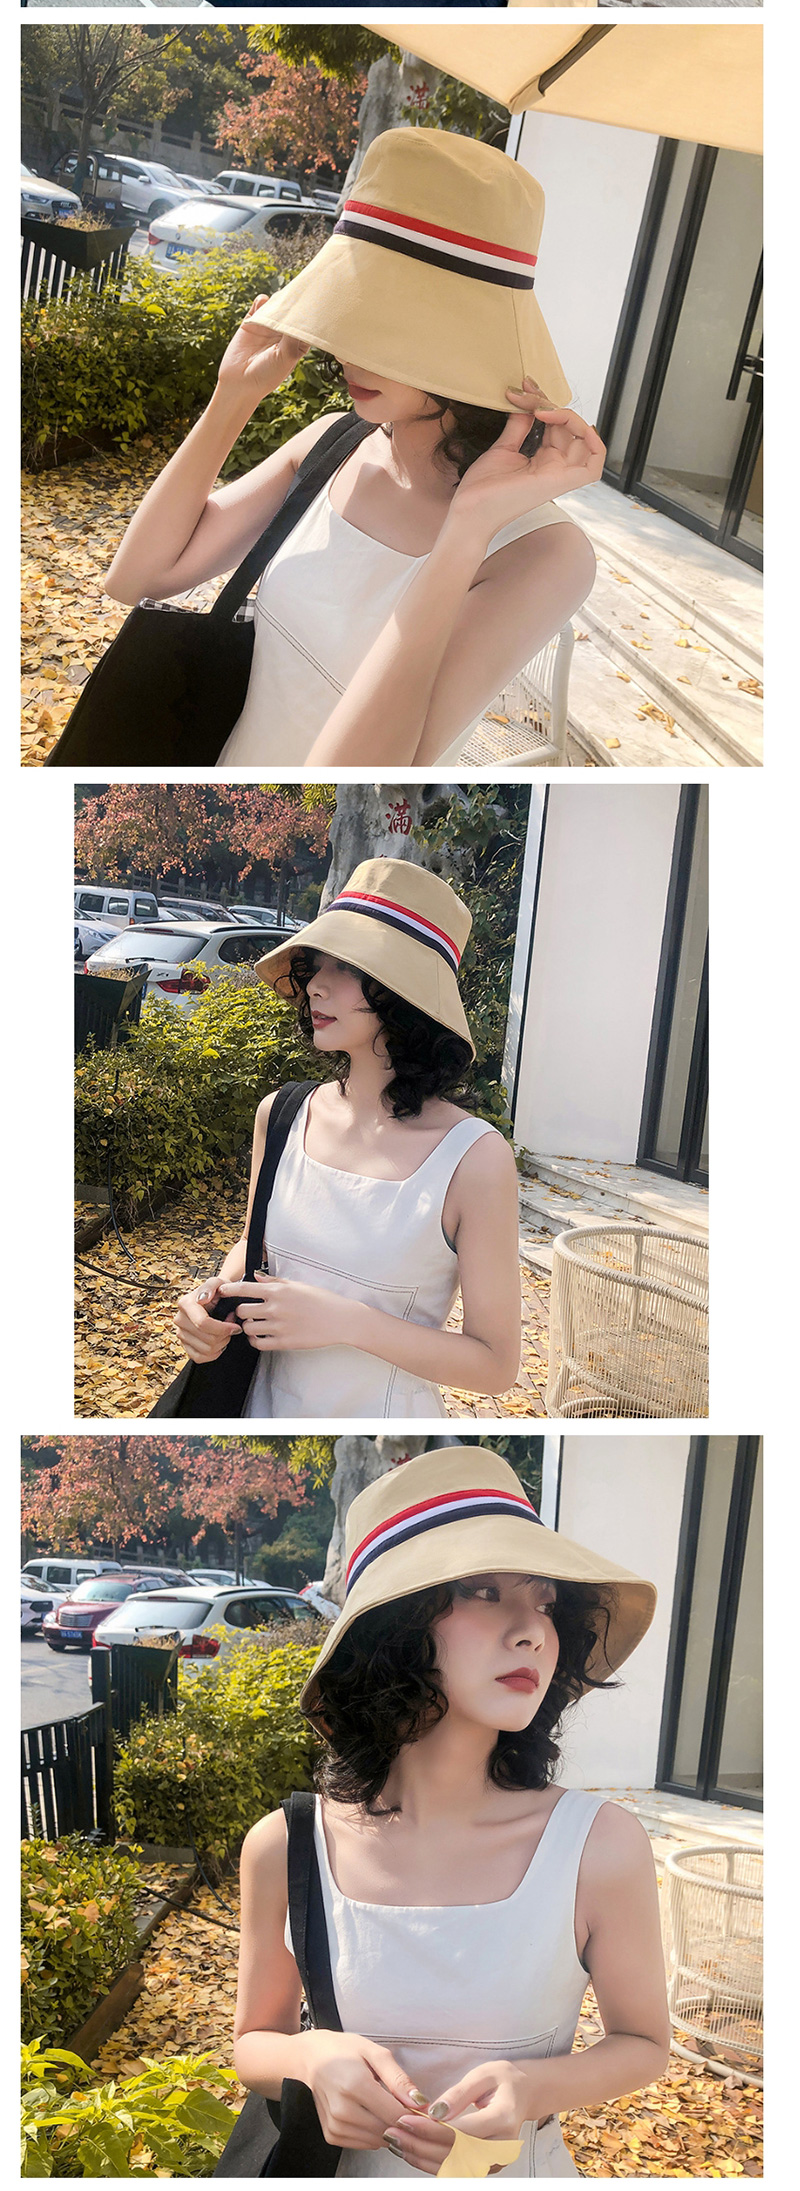 Fashion Yellow Big Hit Color Stitching Brimmed Hat,Sun Hats